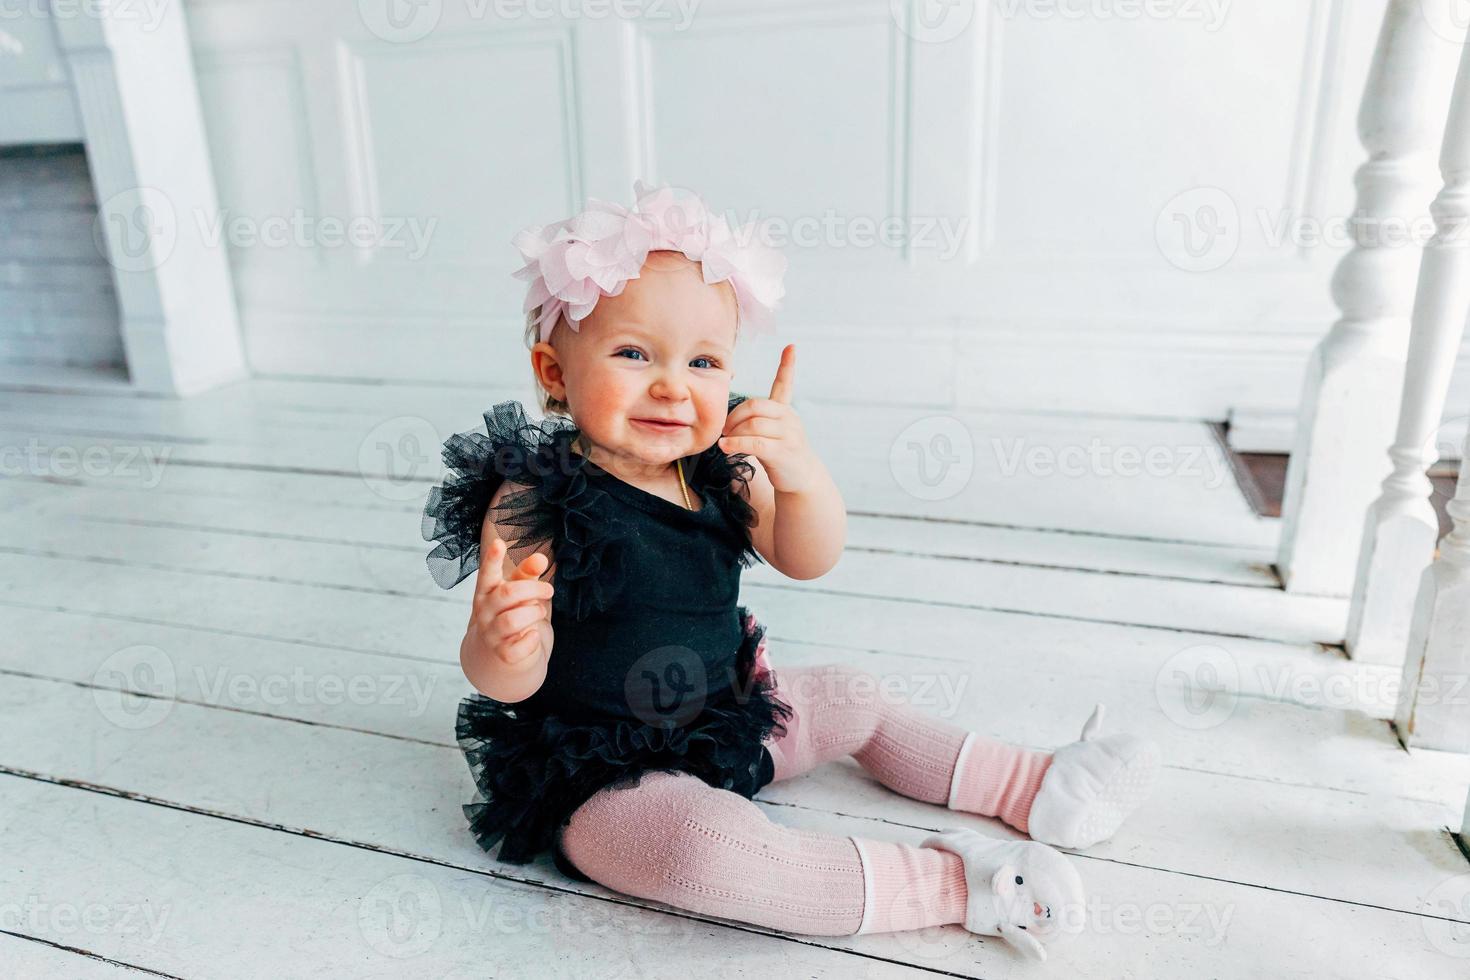 Little crawling baby girl one year old siting on floor in bright light living room smiling and laughing photo